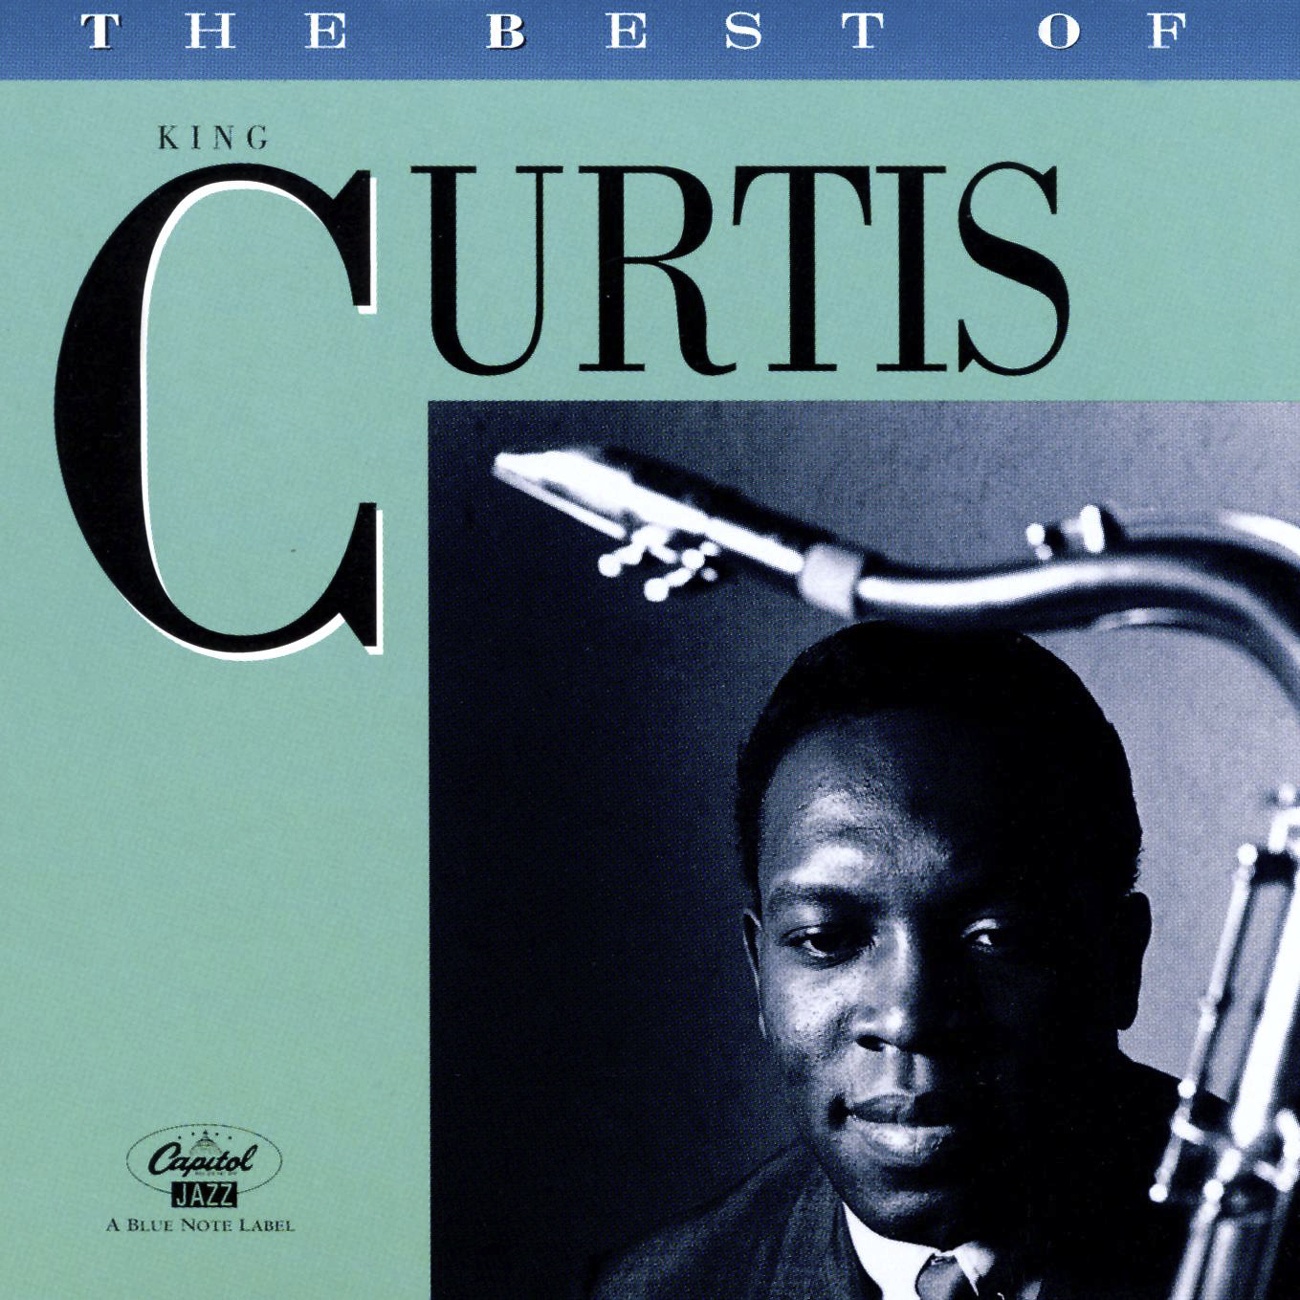 The Best of King Curtis